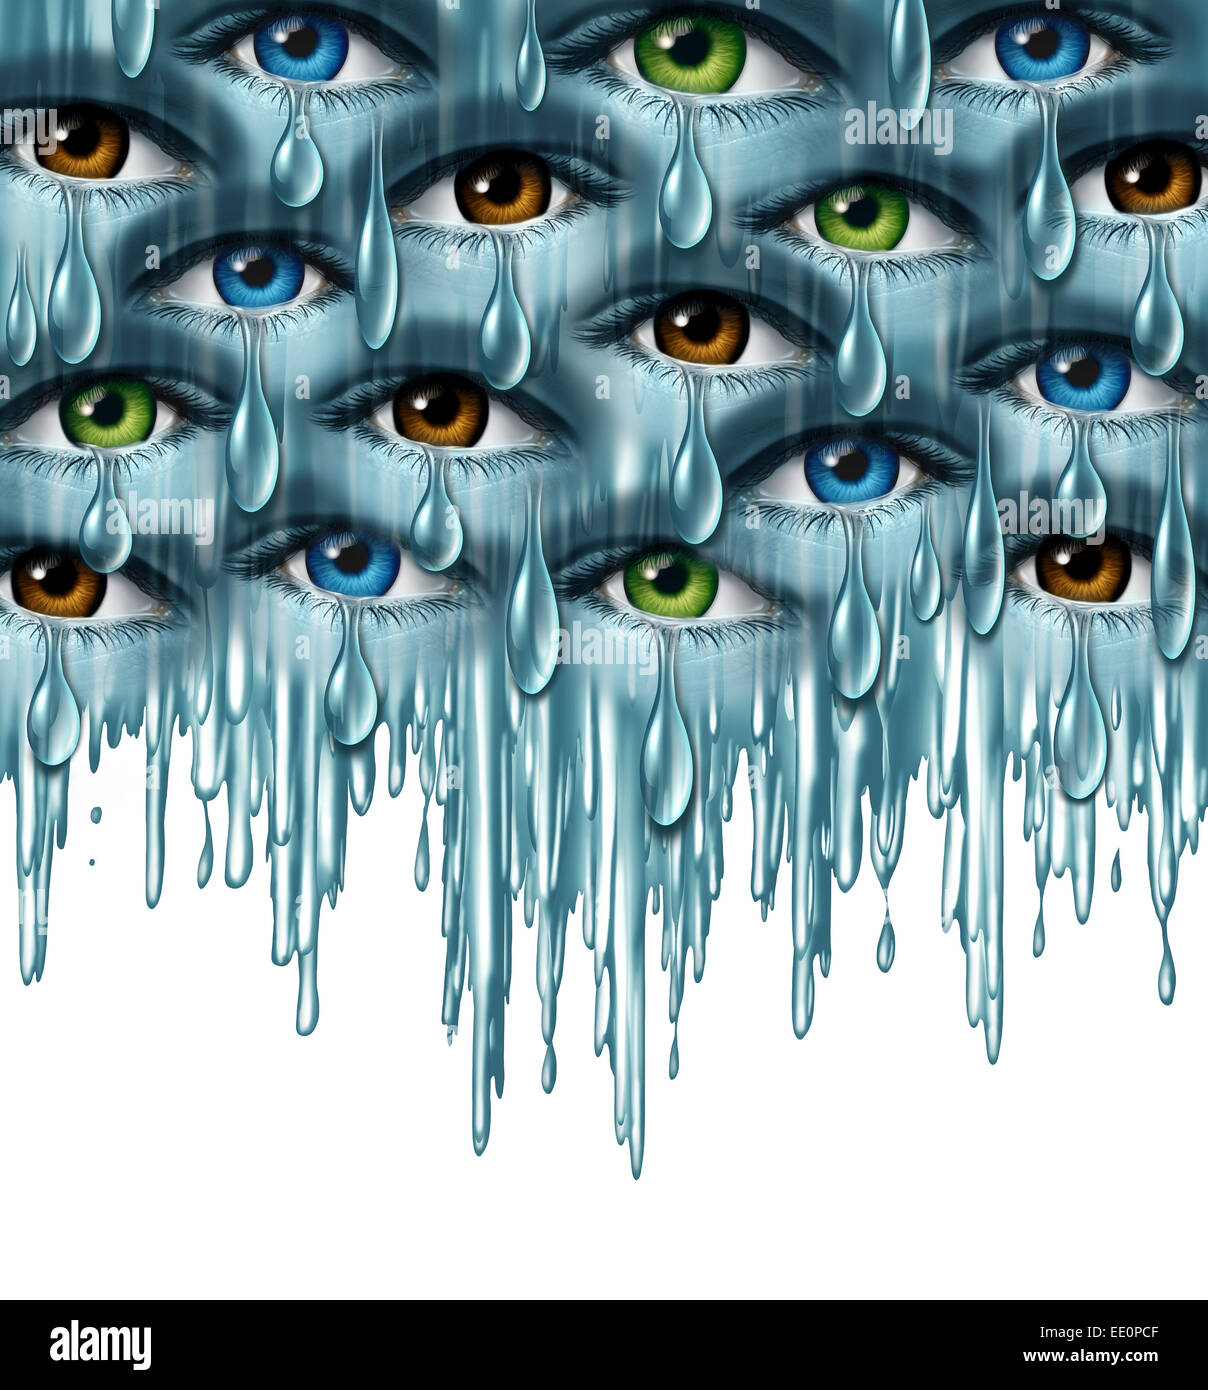 World grief and global tragedy concept as a group of human eyes crying with tears in solidarity coming together as a metaphor for community support and emotional healing. Stock Photo